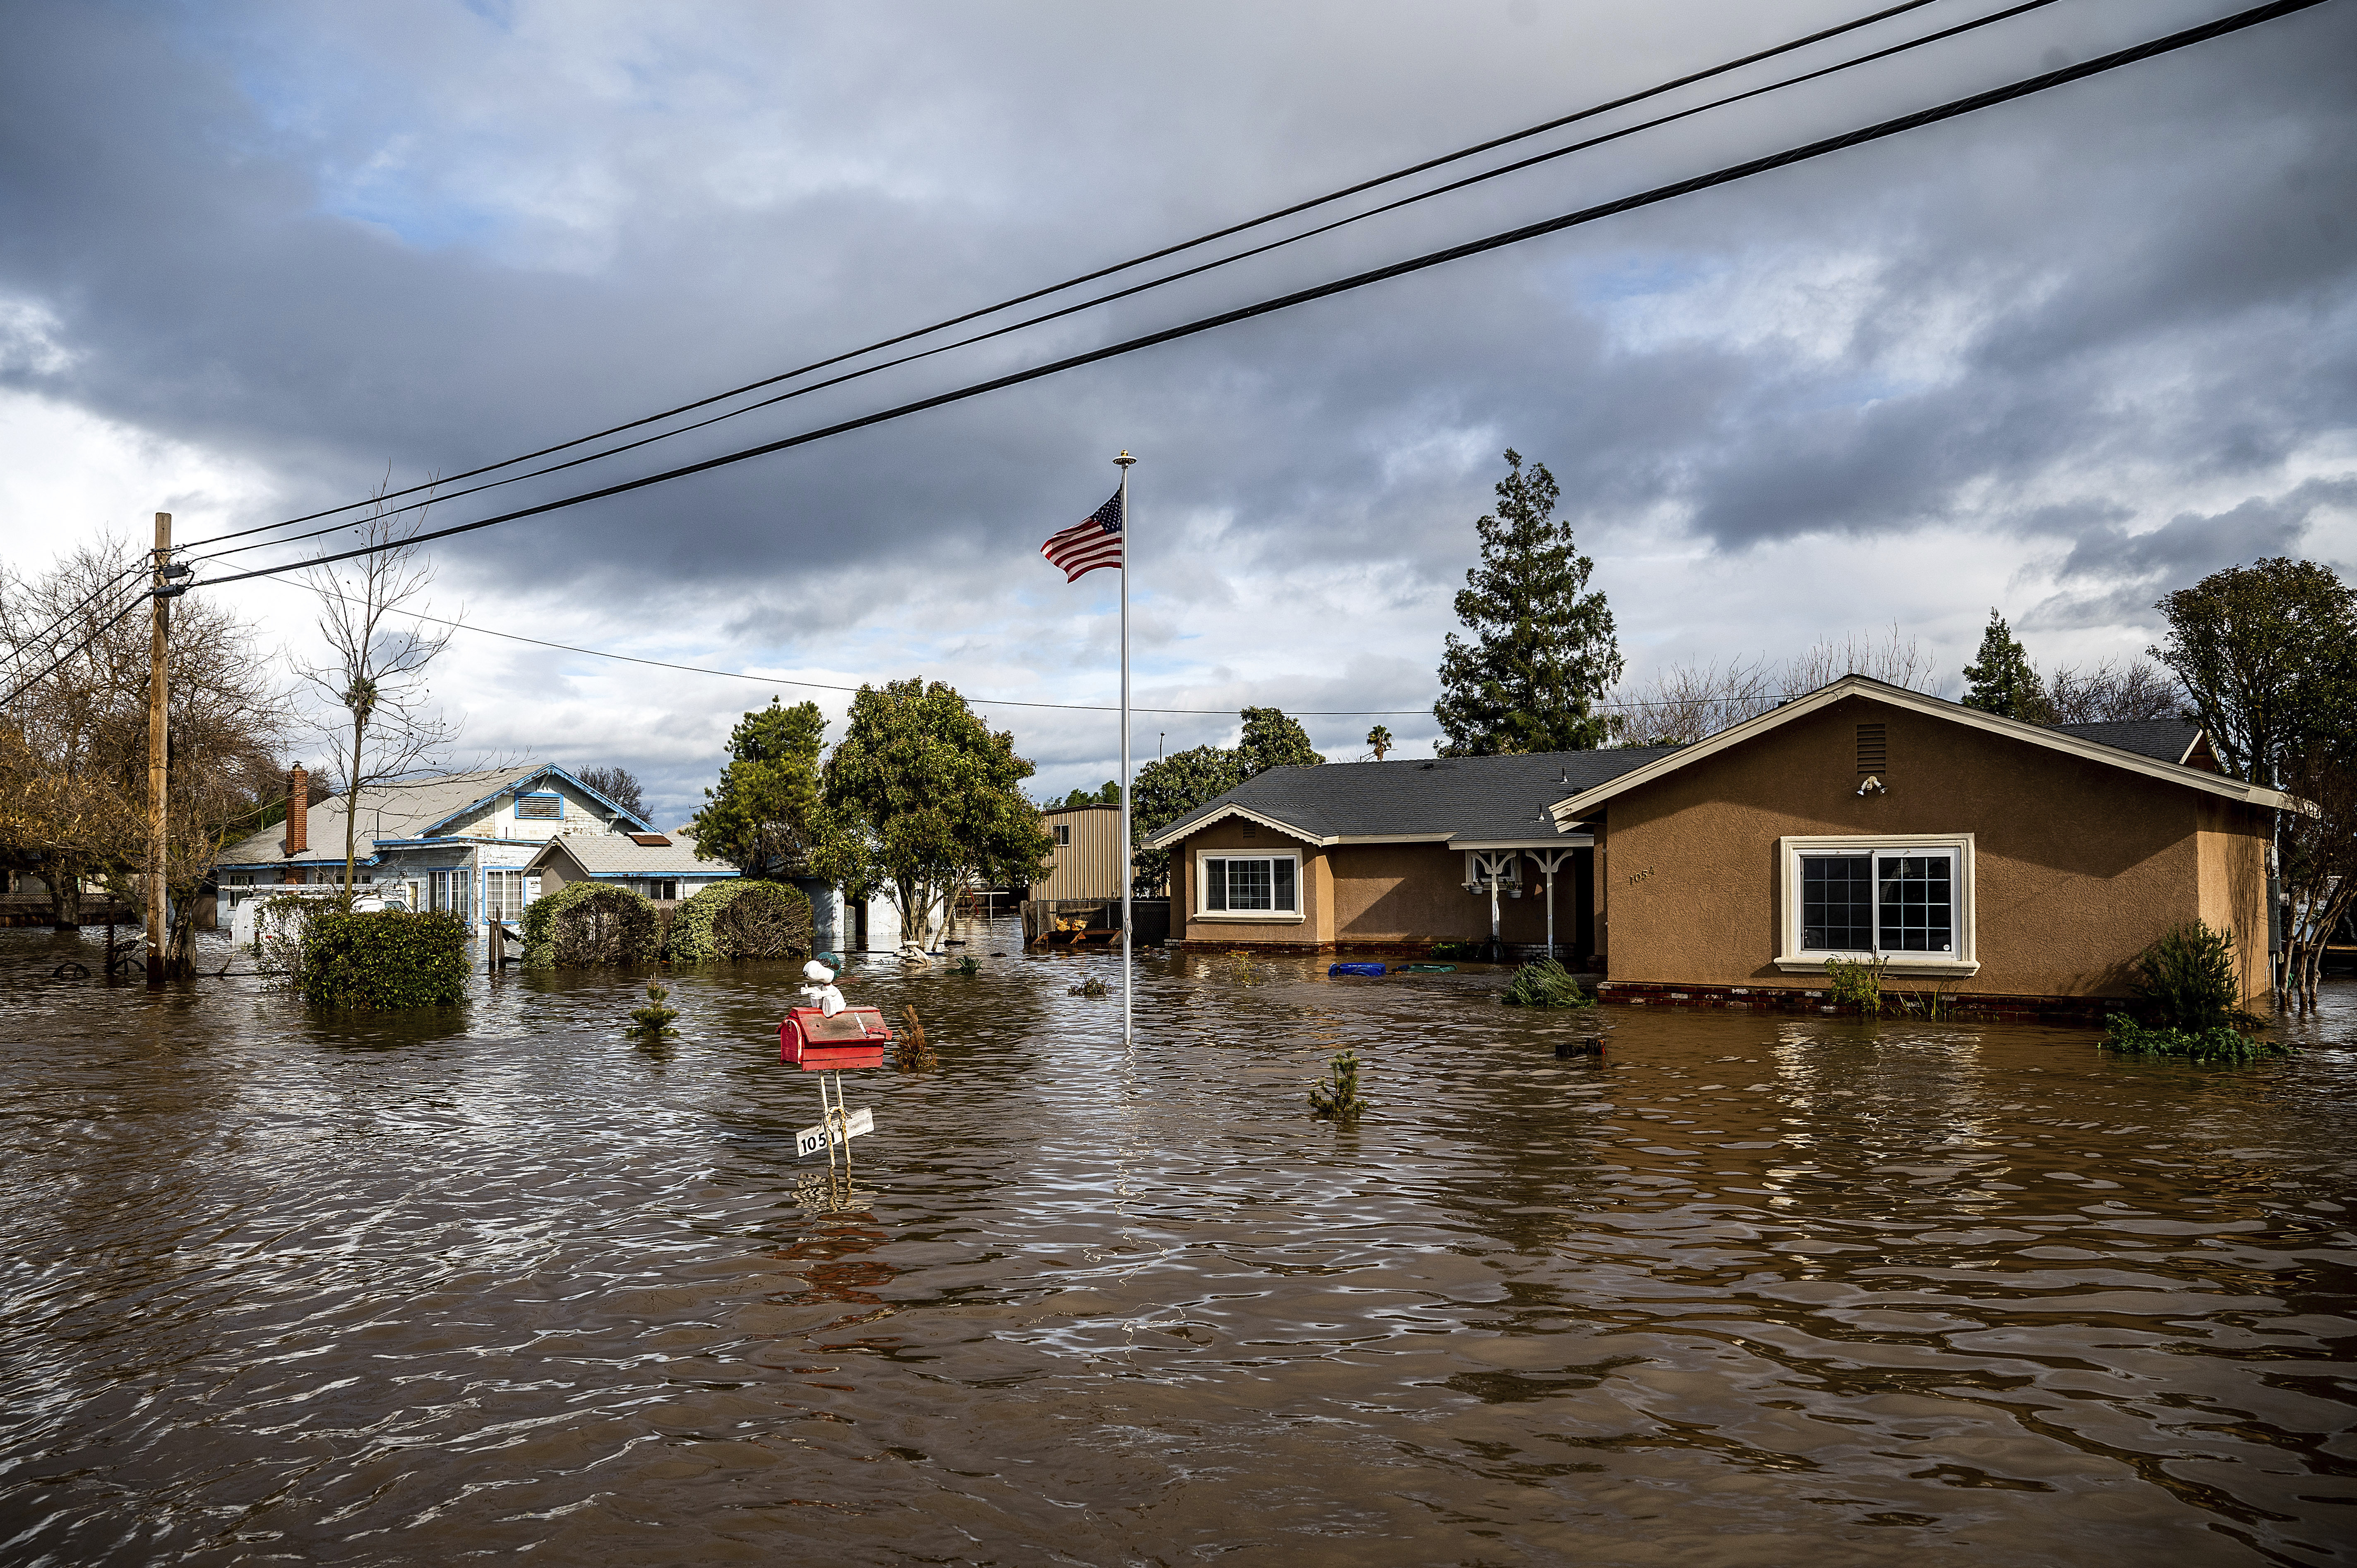 Floodwaters surround homes on Thornton Rd. in Merced, Calif., as storms continue battering the state on Tuesday, Jan. 10, 2023.